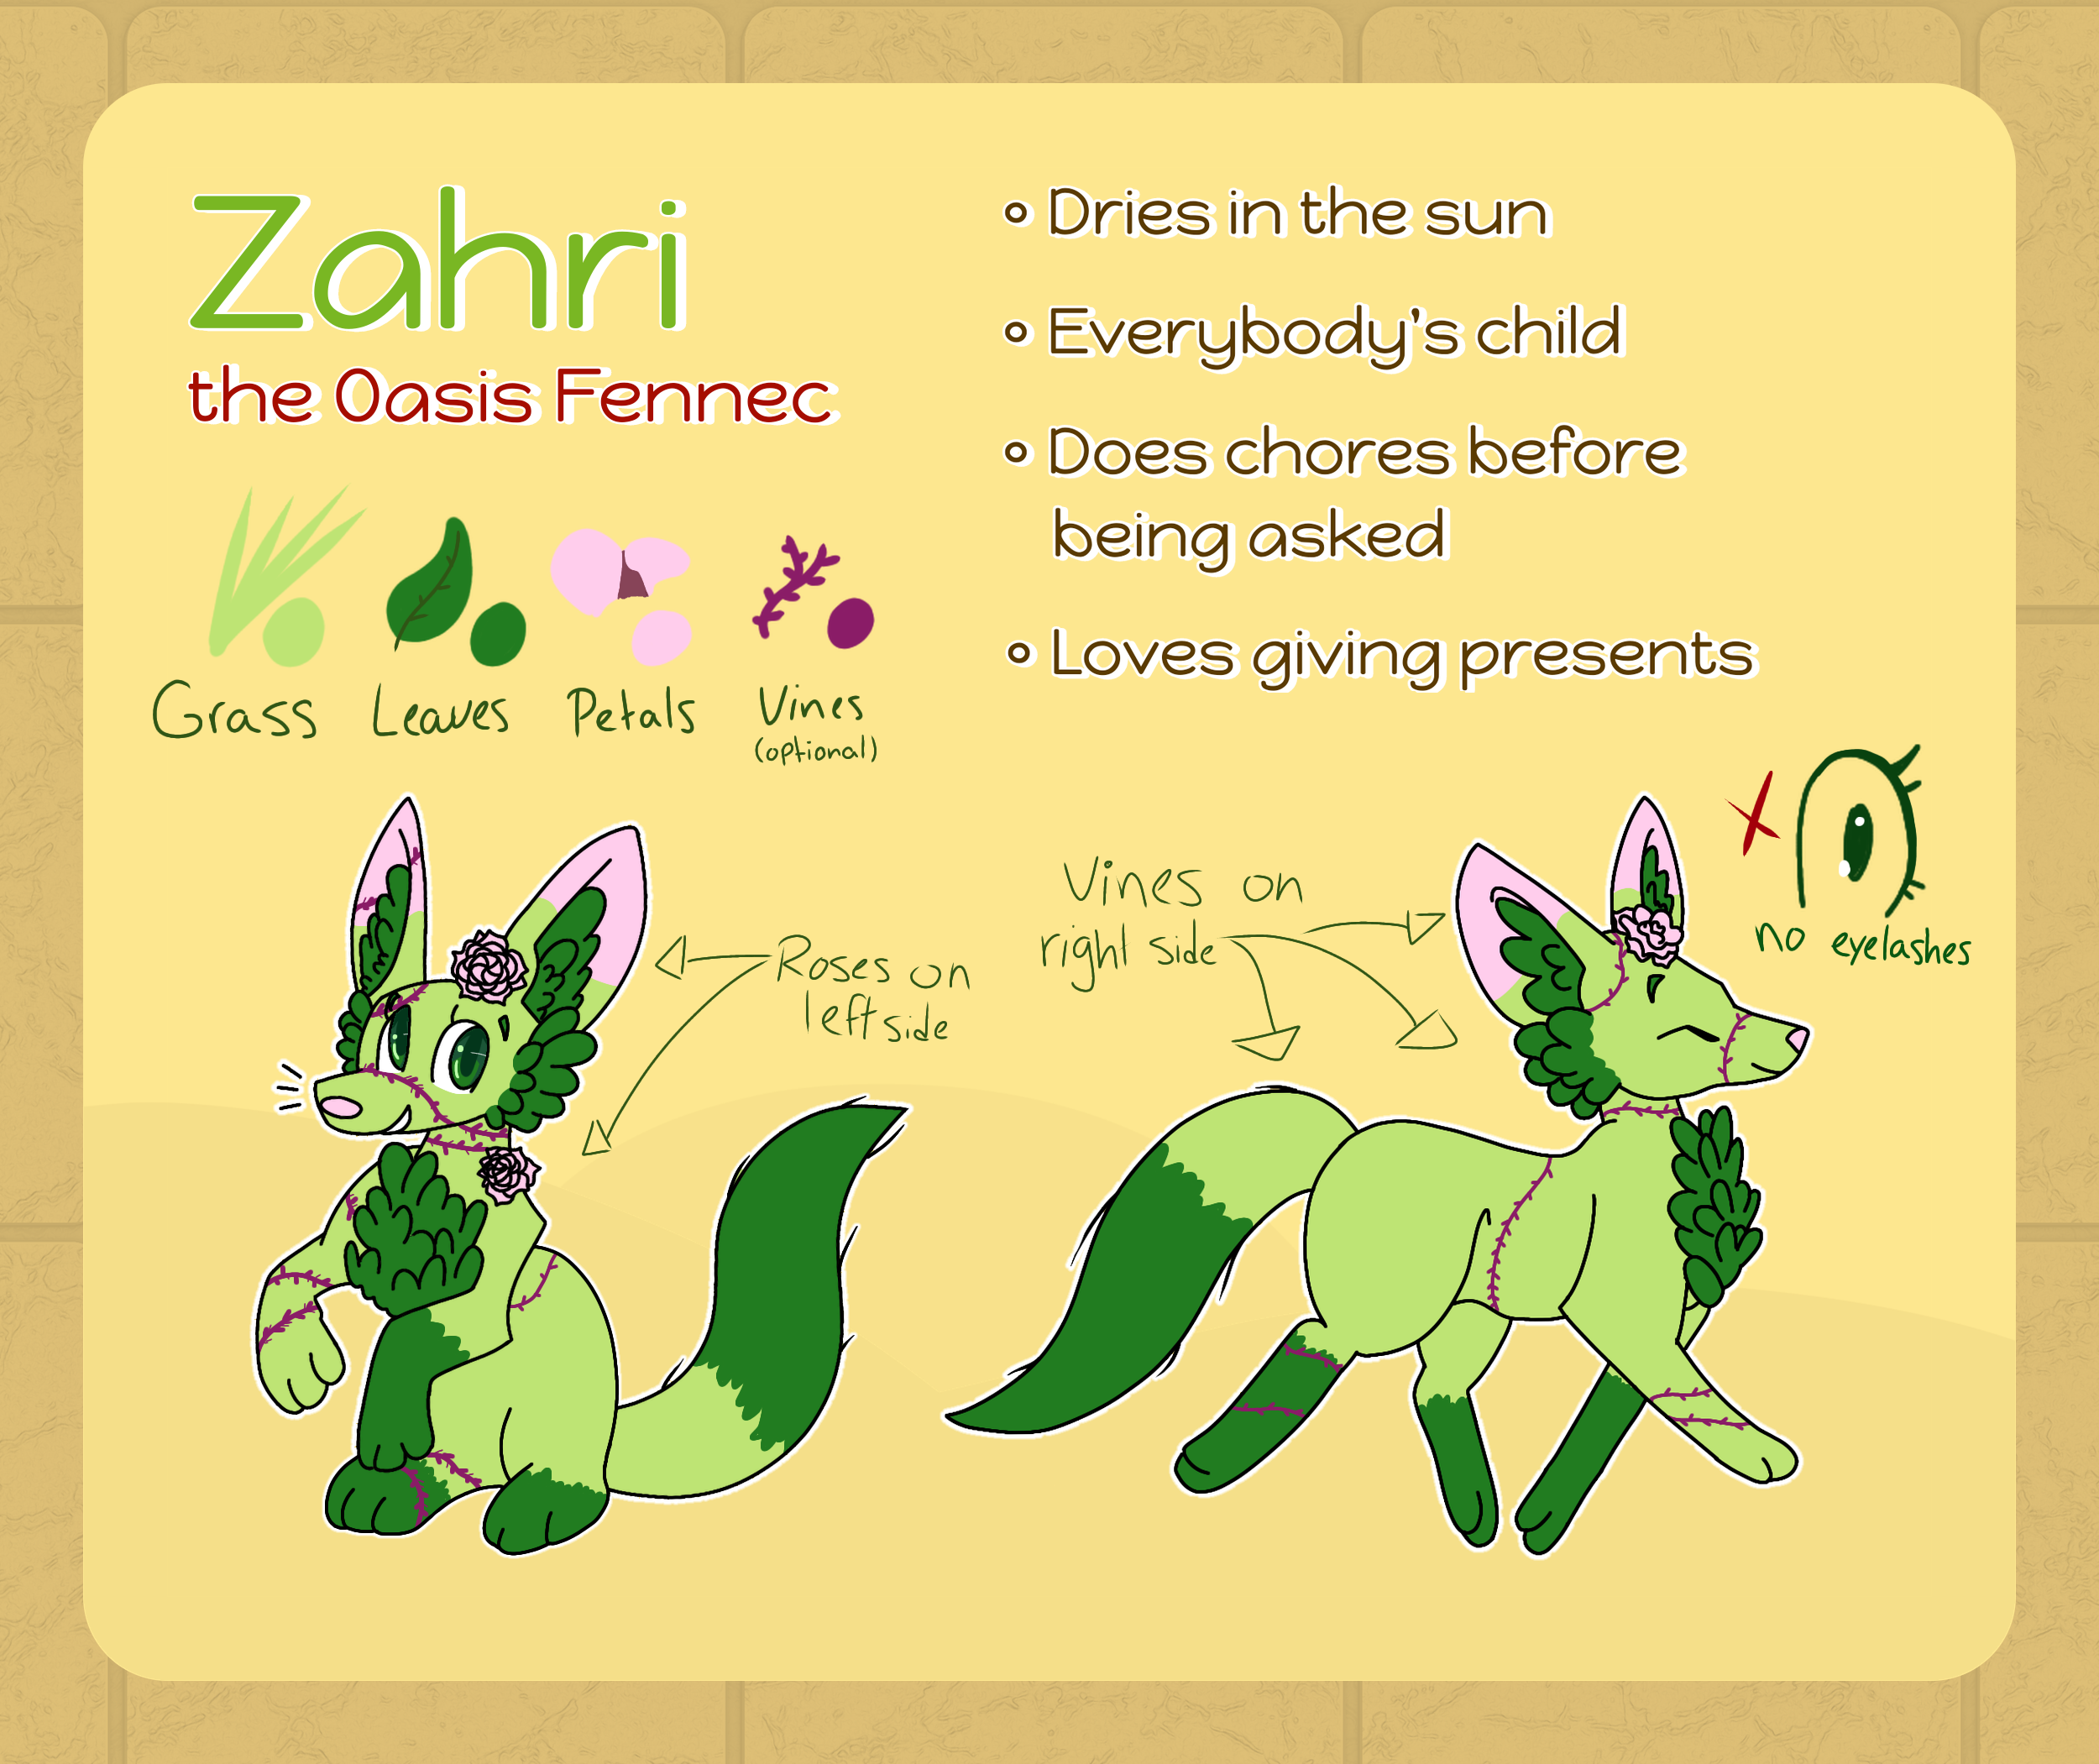 Zahri's current Reference sheet (October 2021)